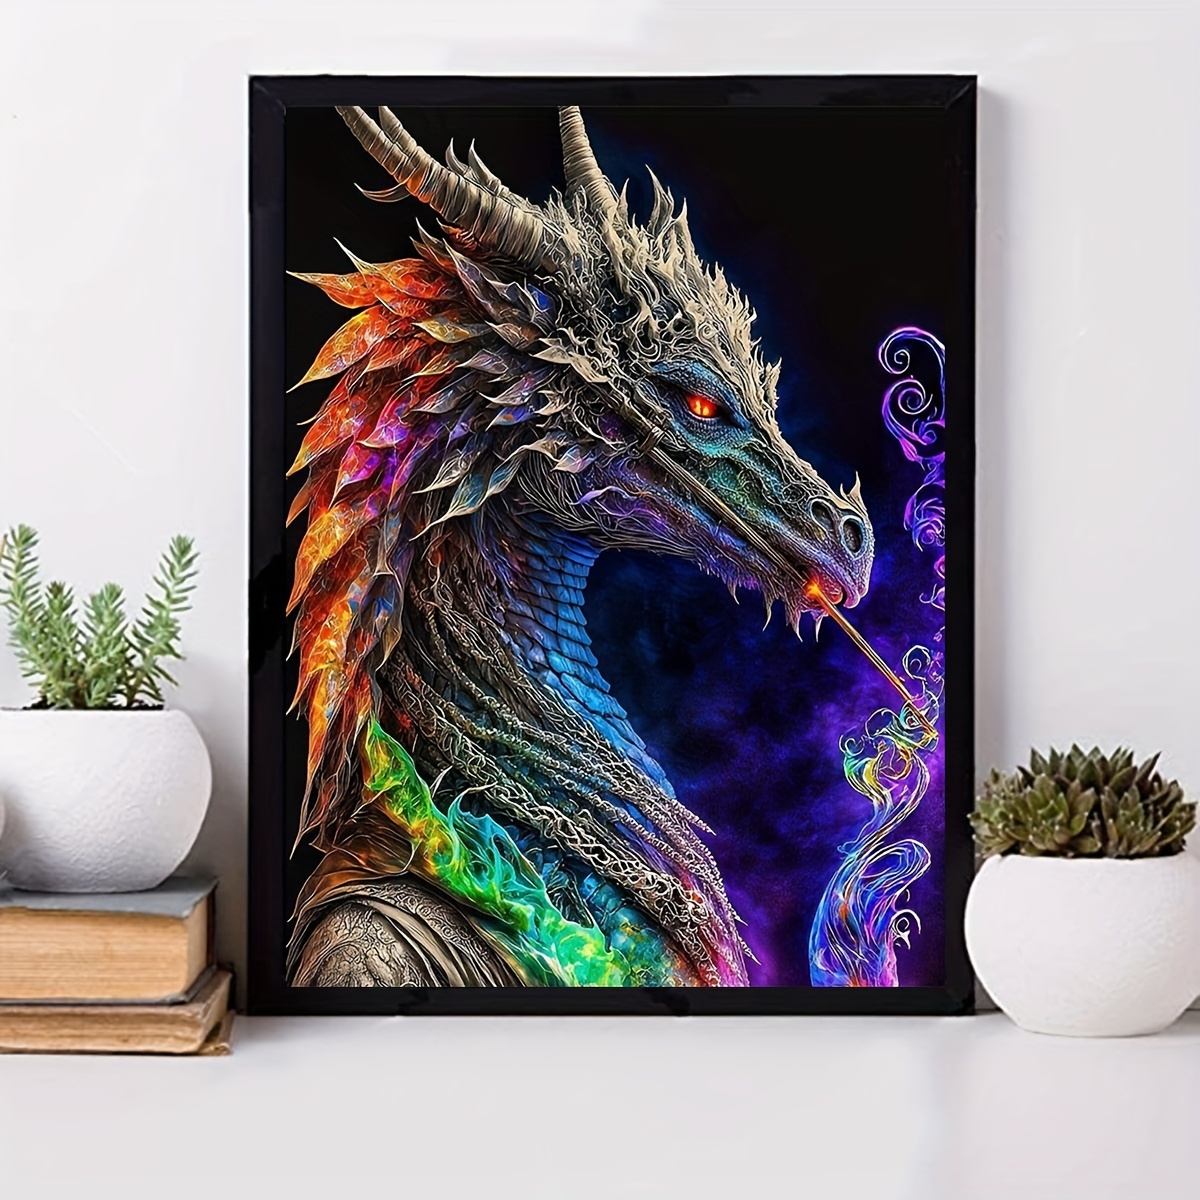 DIY 5D Diamond Painting Dragon Animal Full Drill with Number Kits